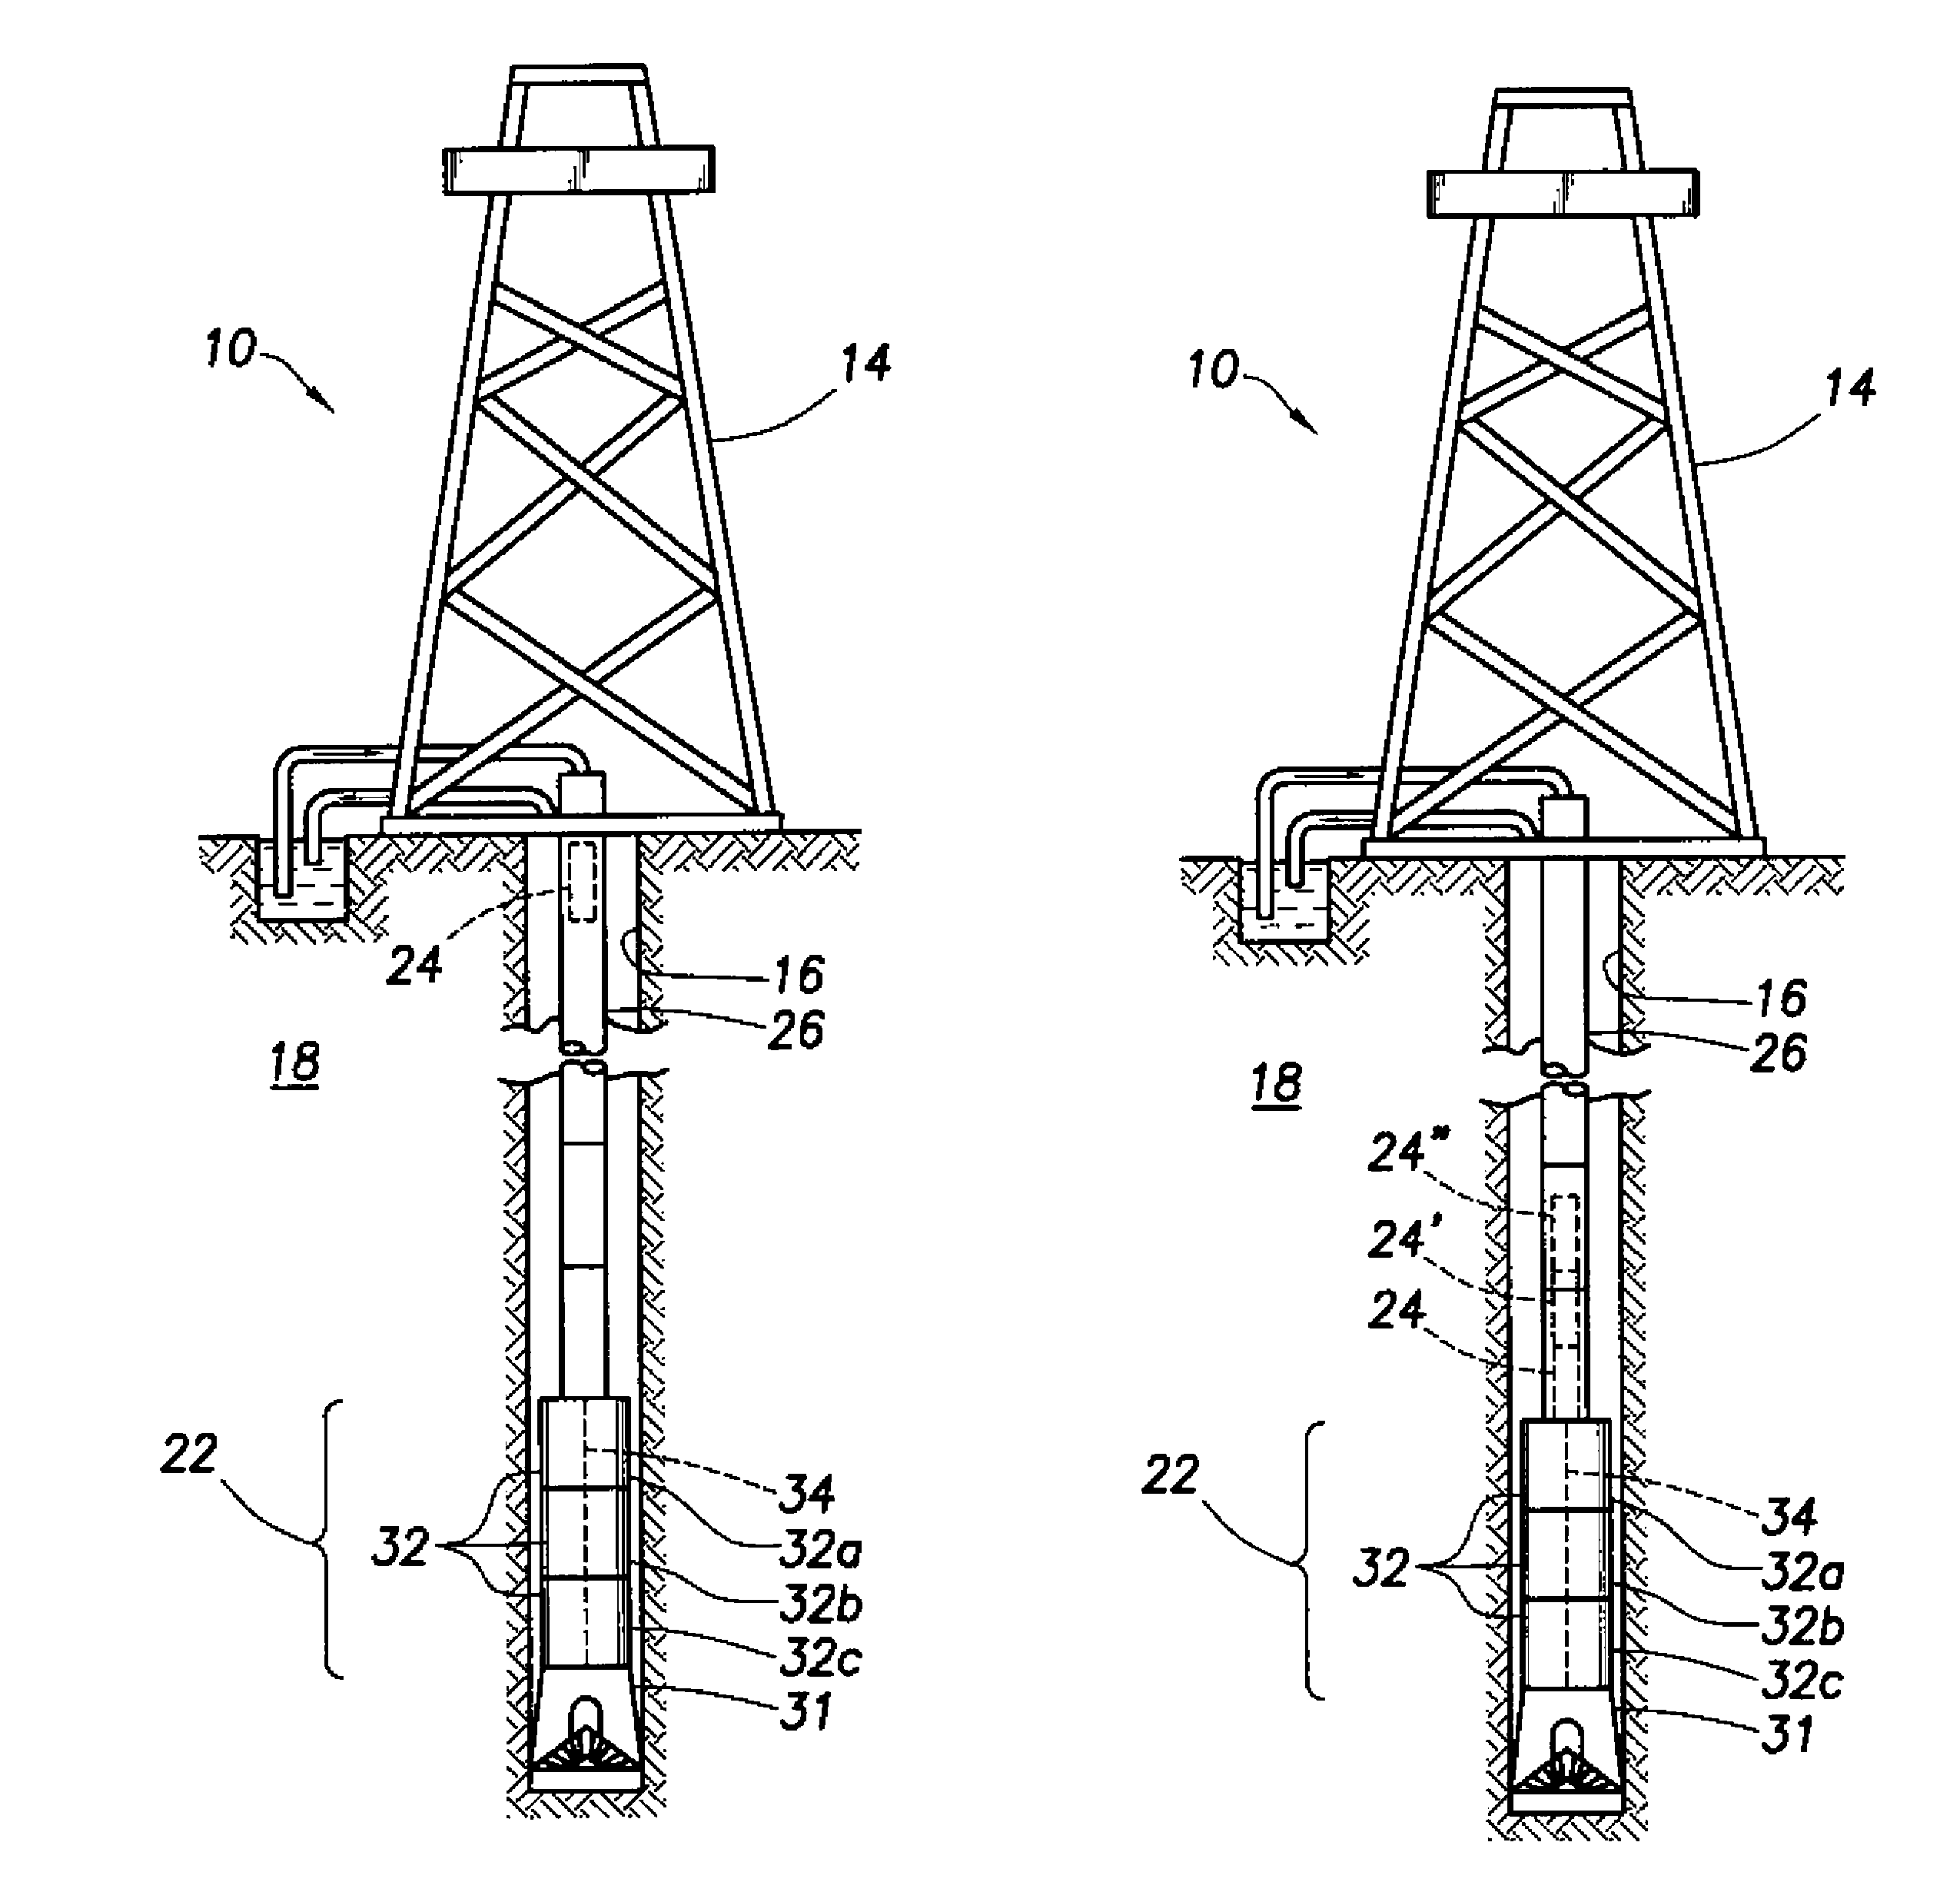 Wellbore surveying system and method